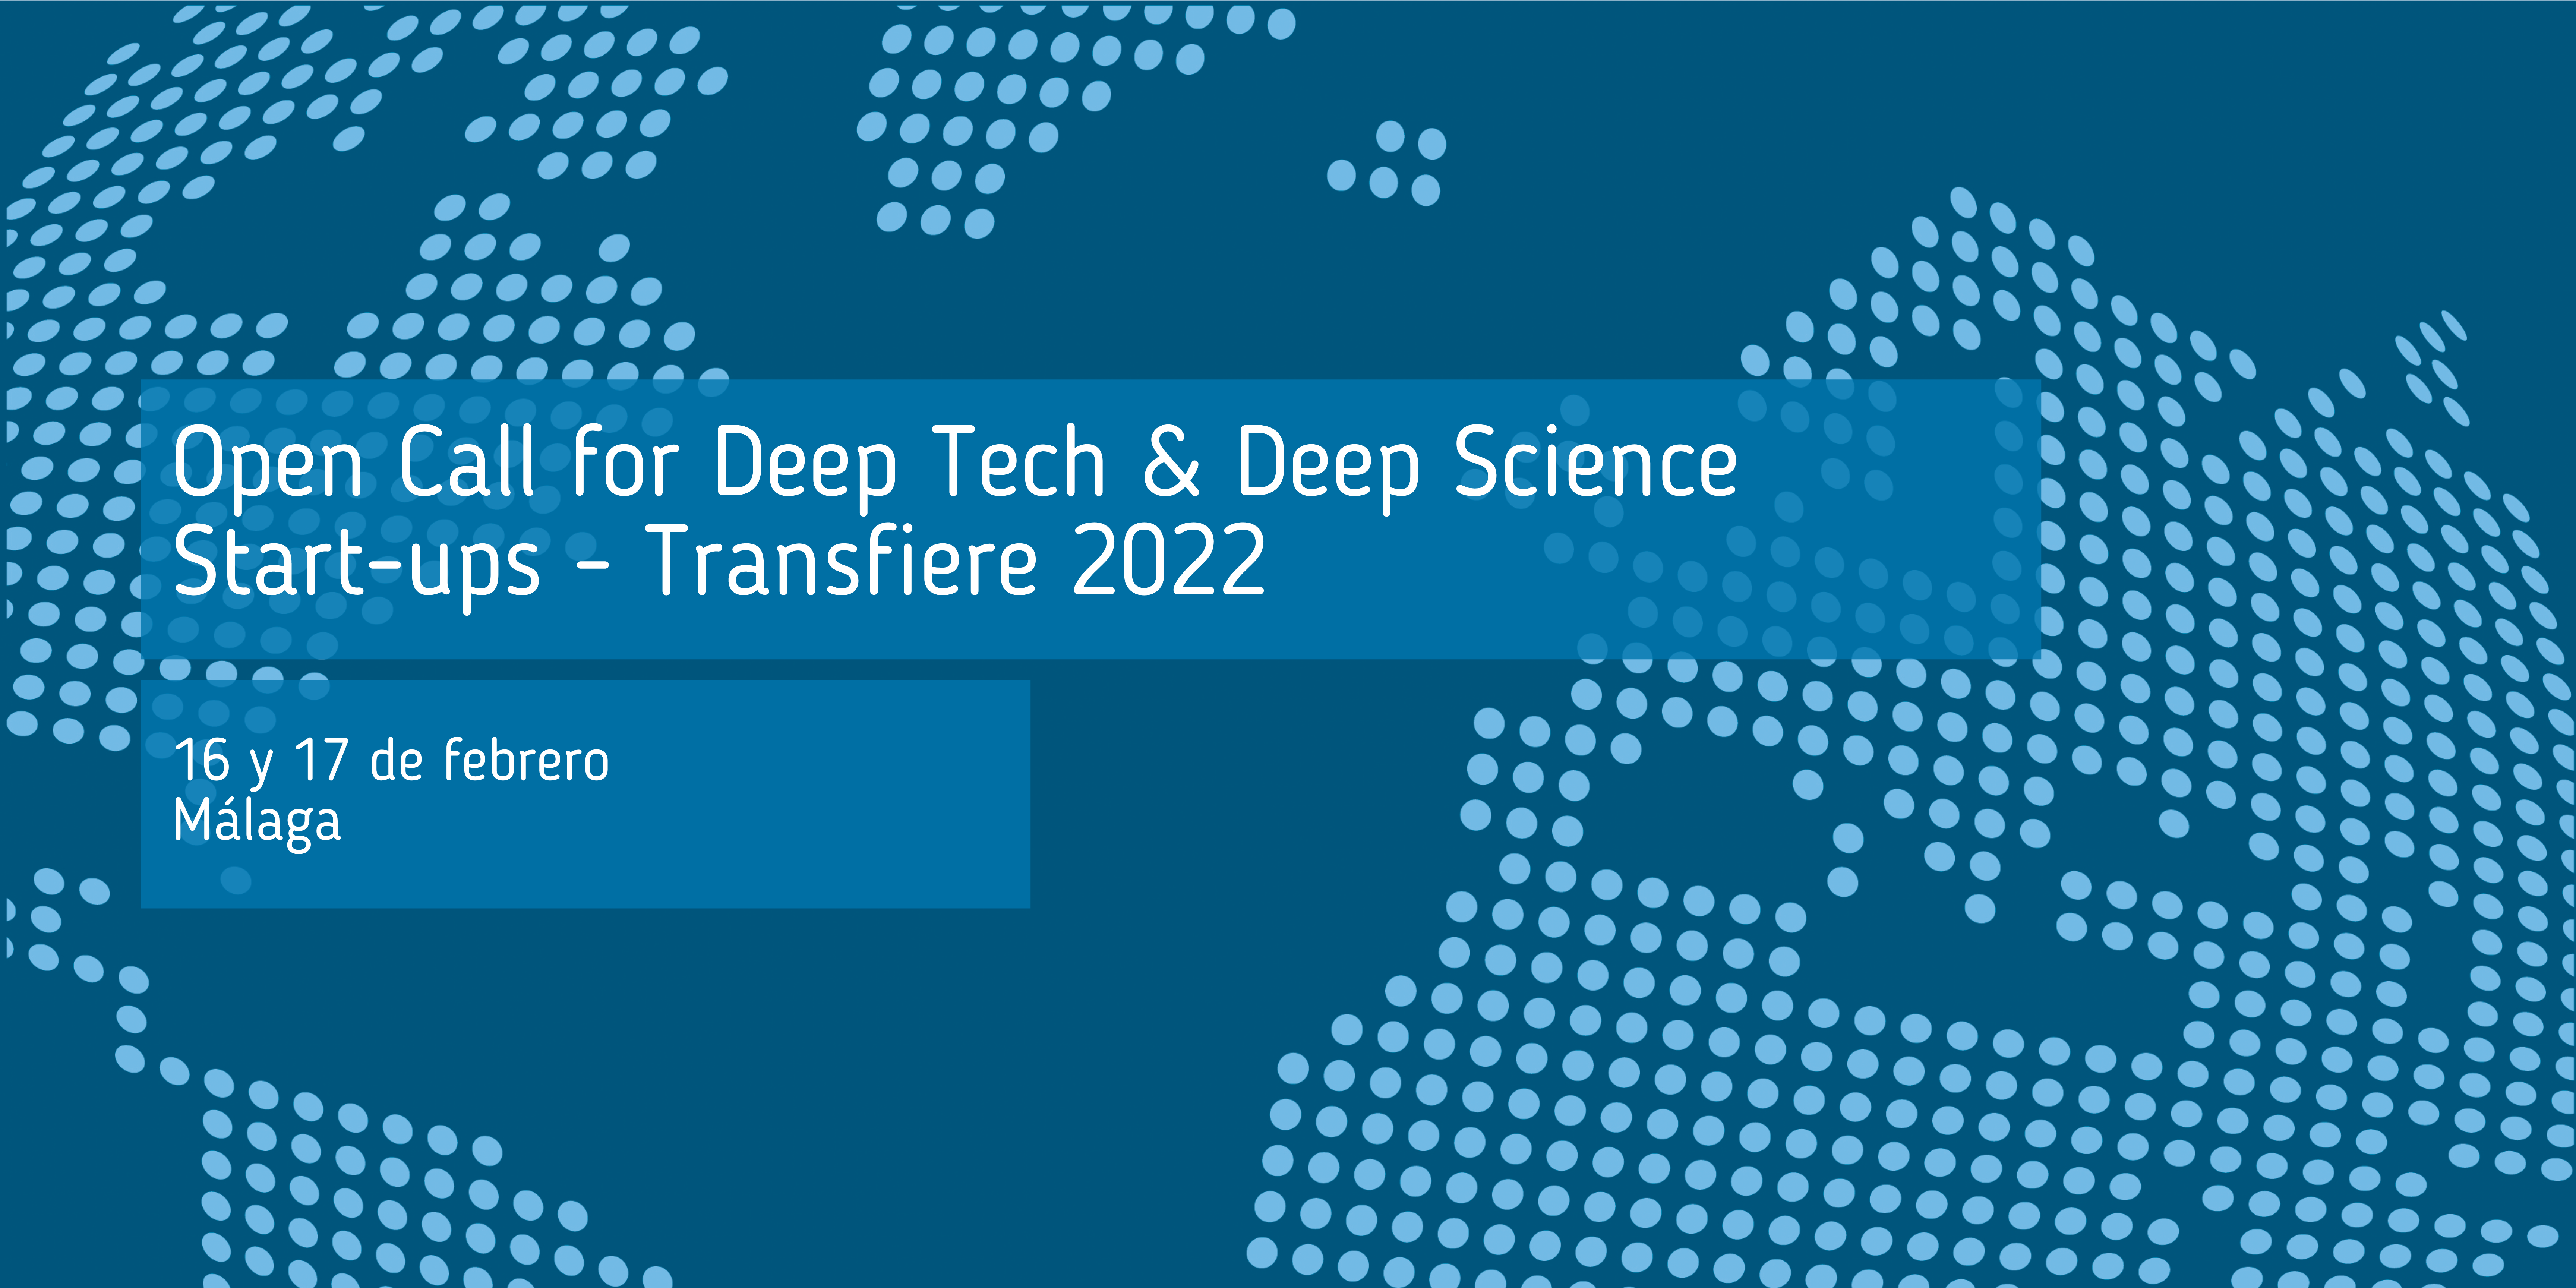 open_calls_for_deep_tech_and_science_start_ups_transfiere_2022